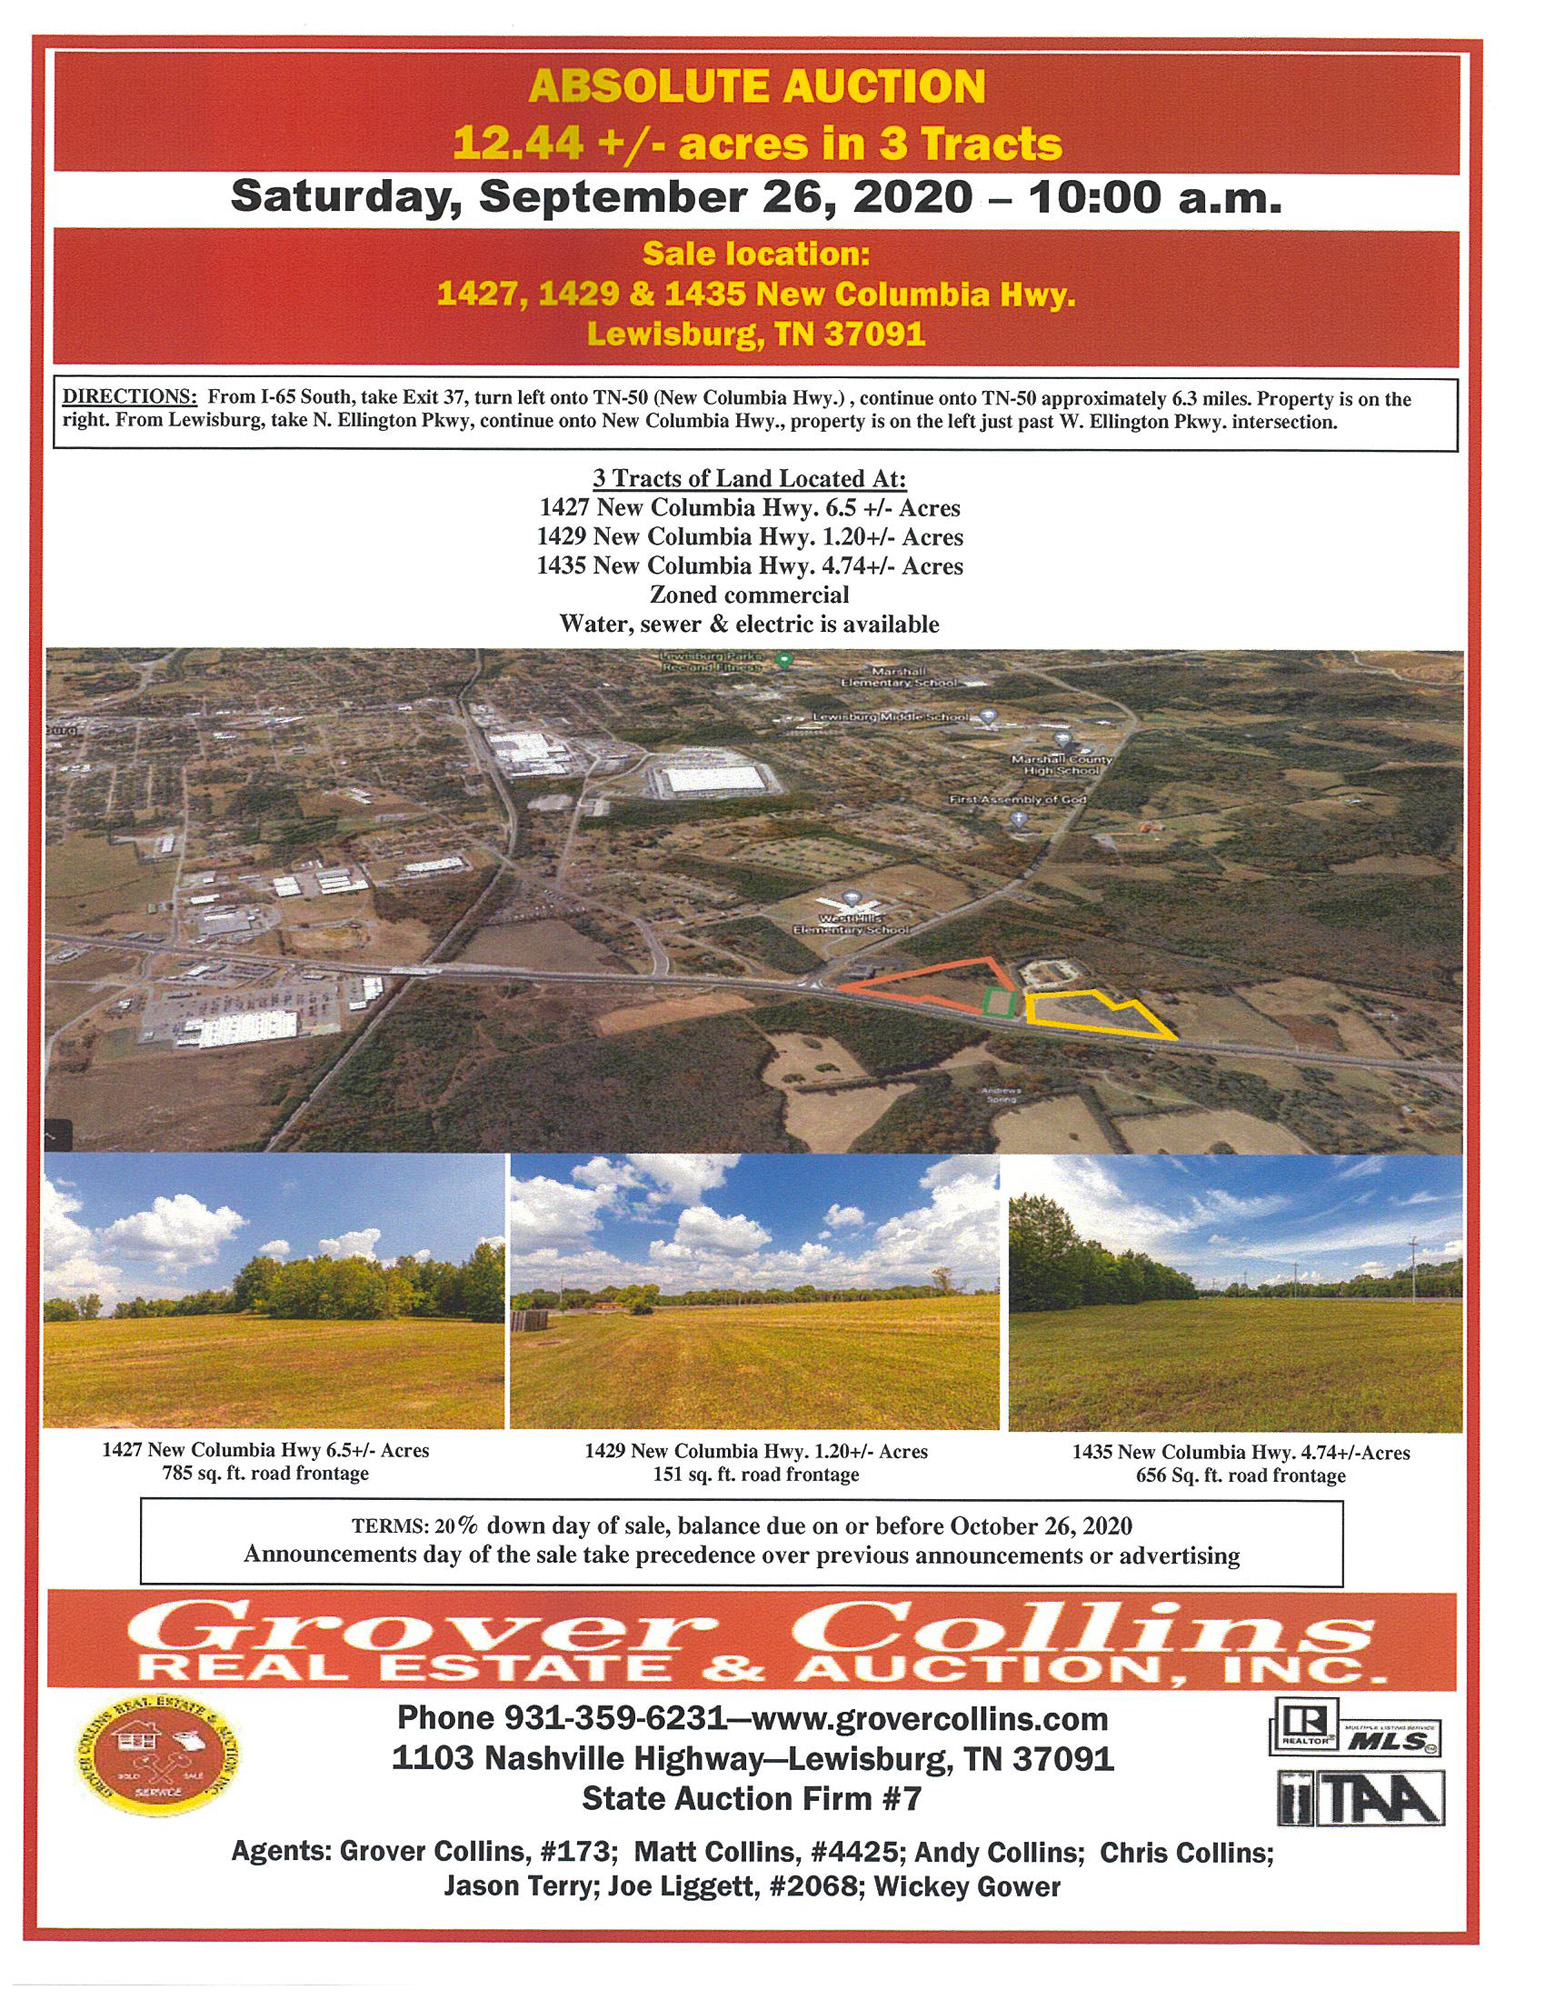 New Columbia Highway Auction